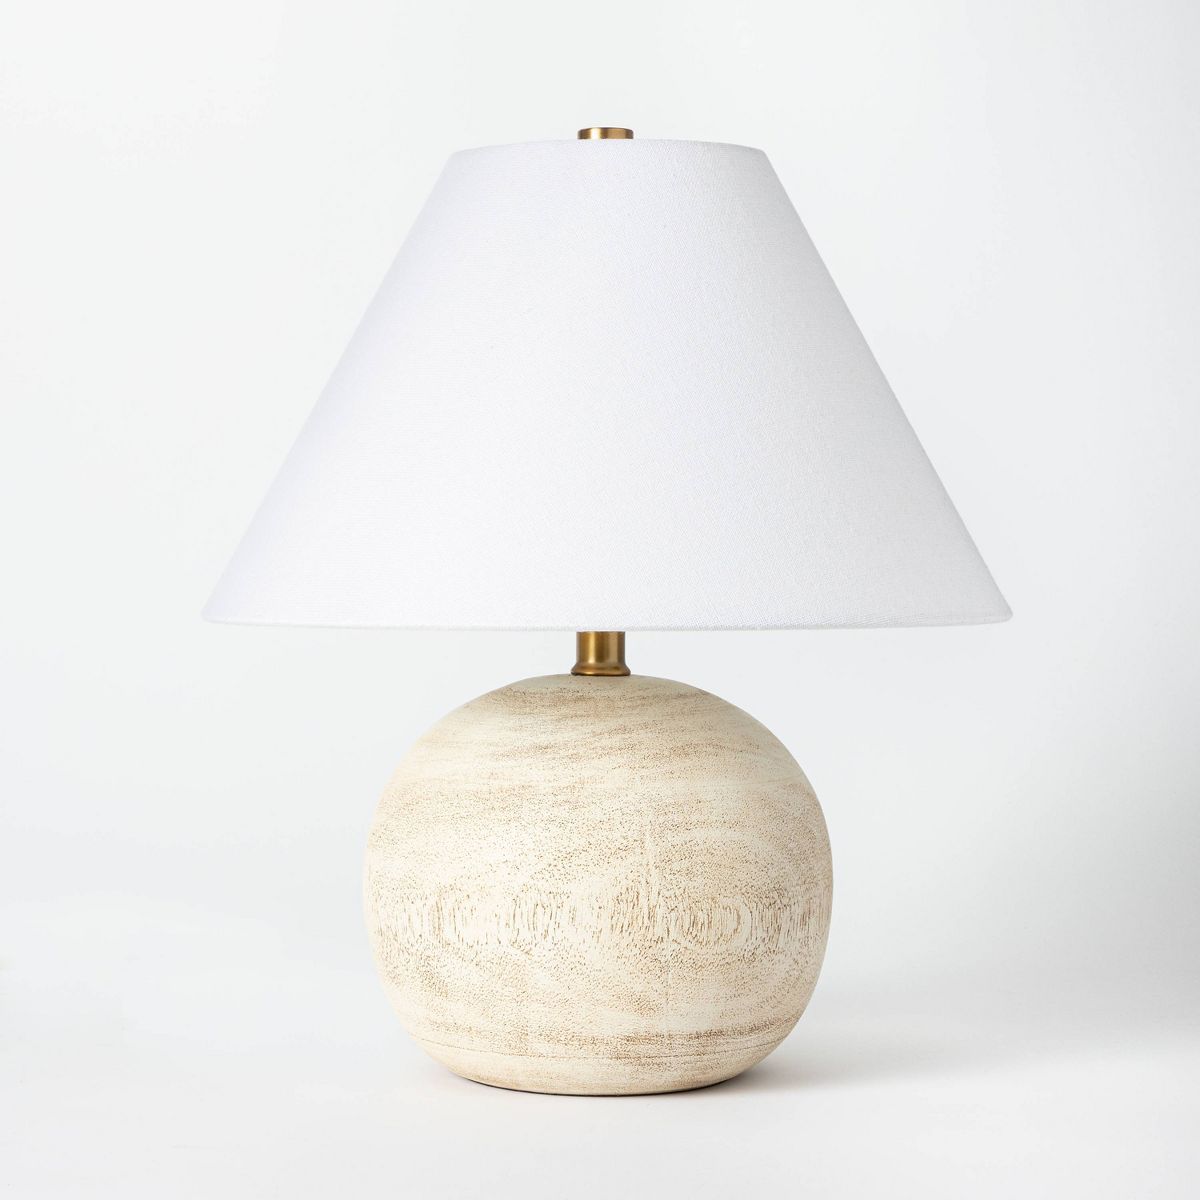 16"x14" Medium Faux Wood Table Lamp Brown - Threshold™ designed with Studio McGee | Target